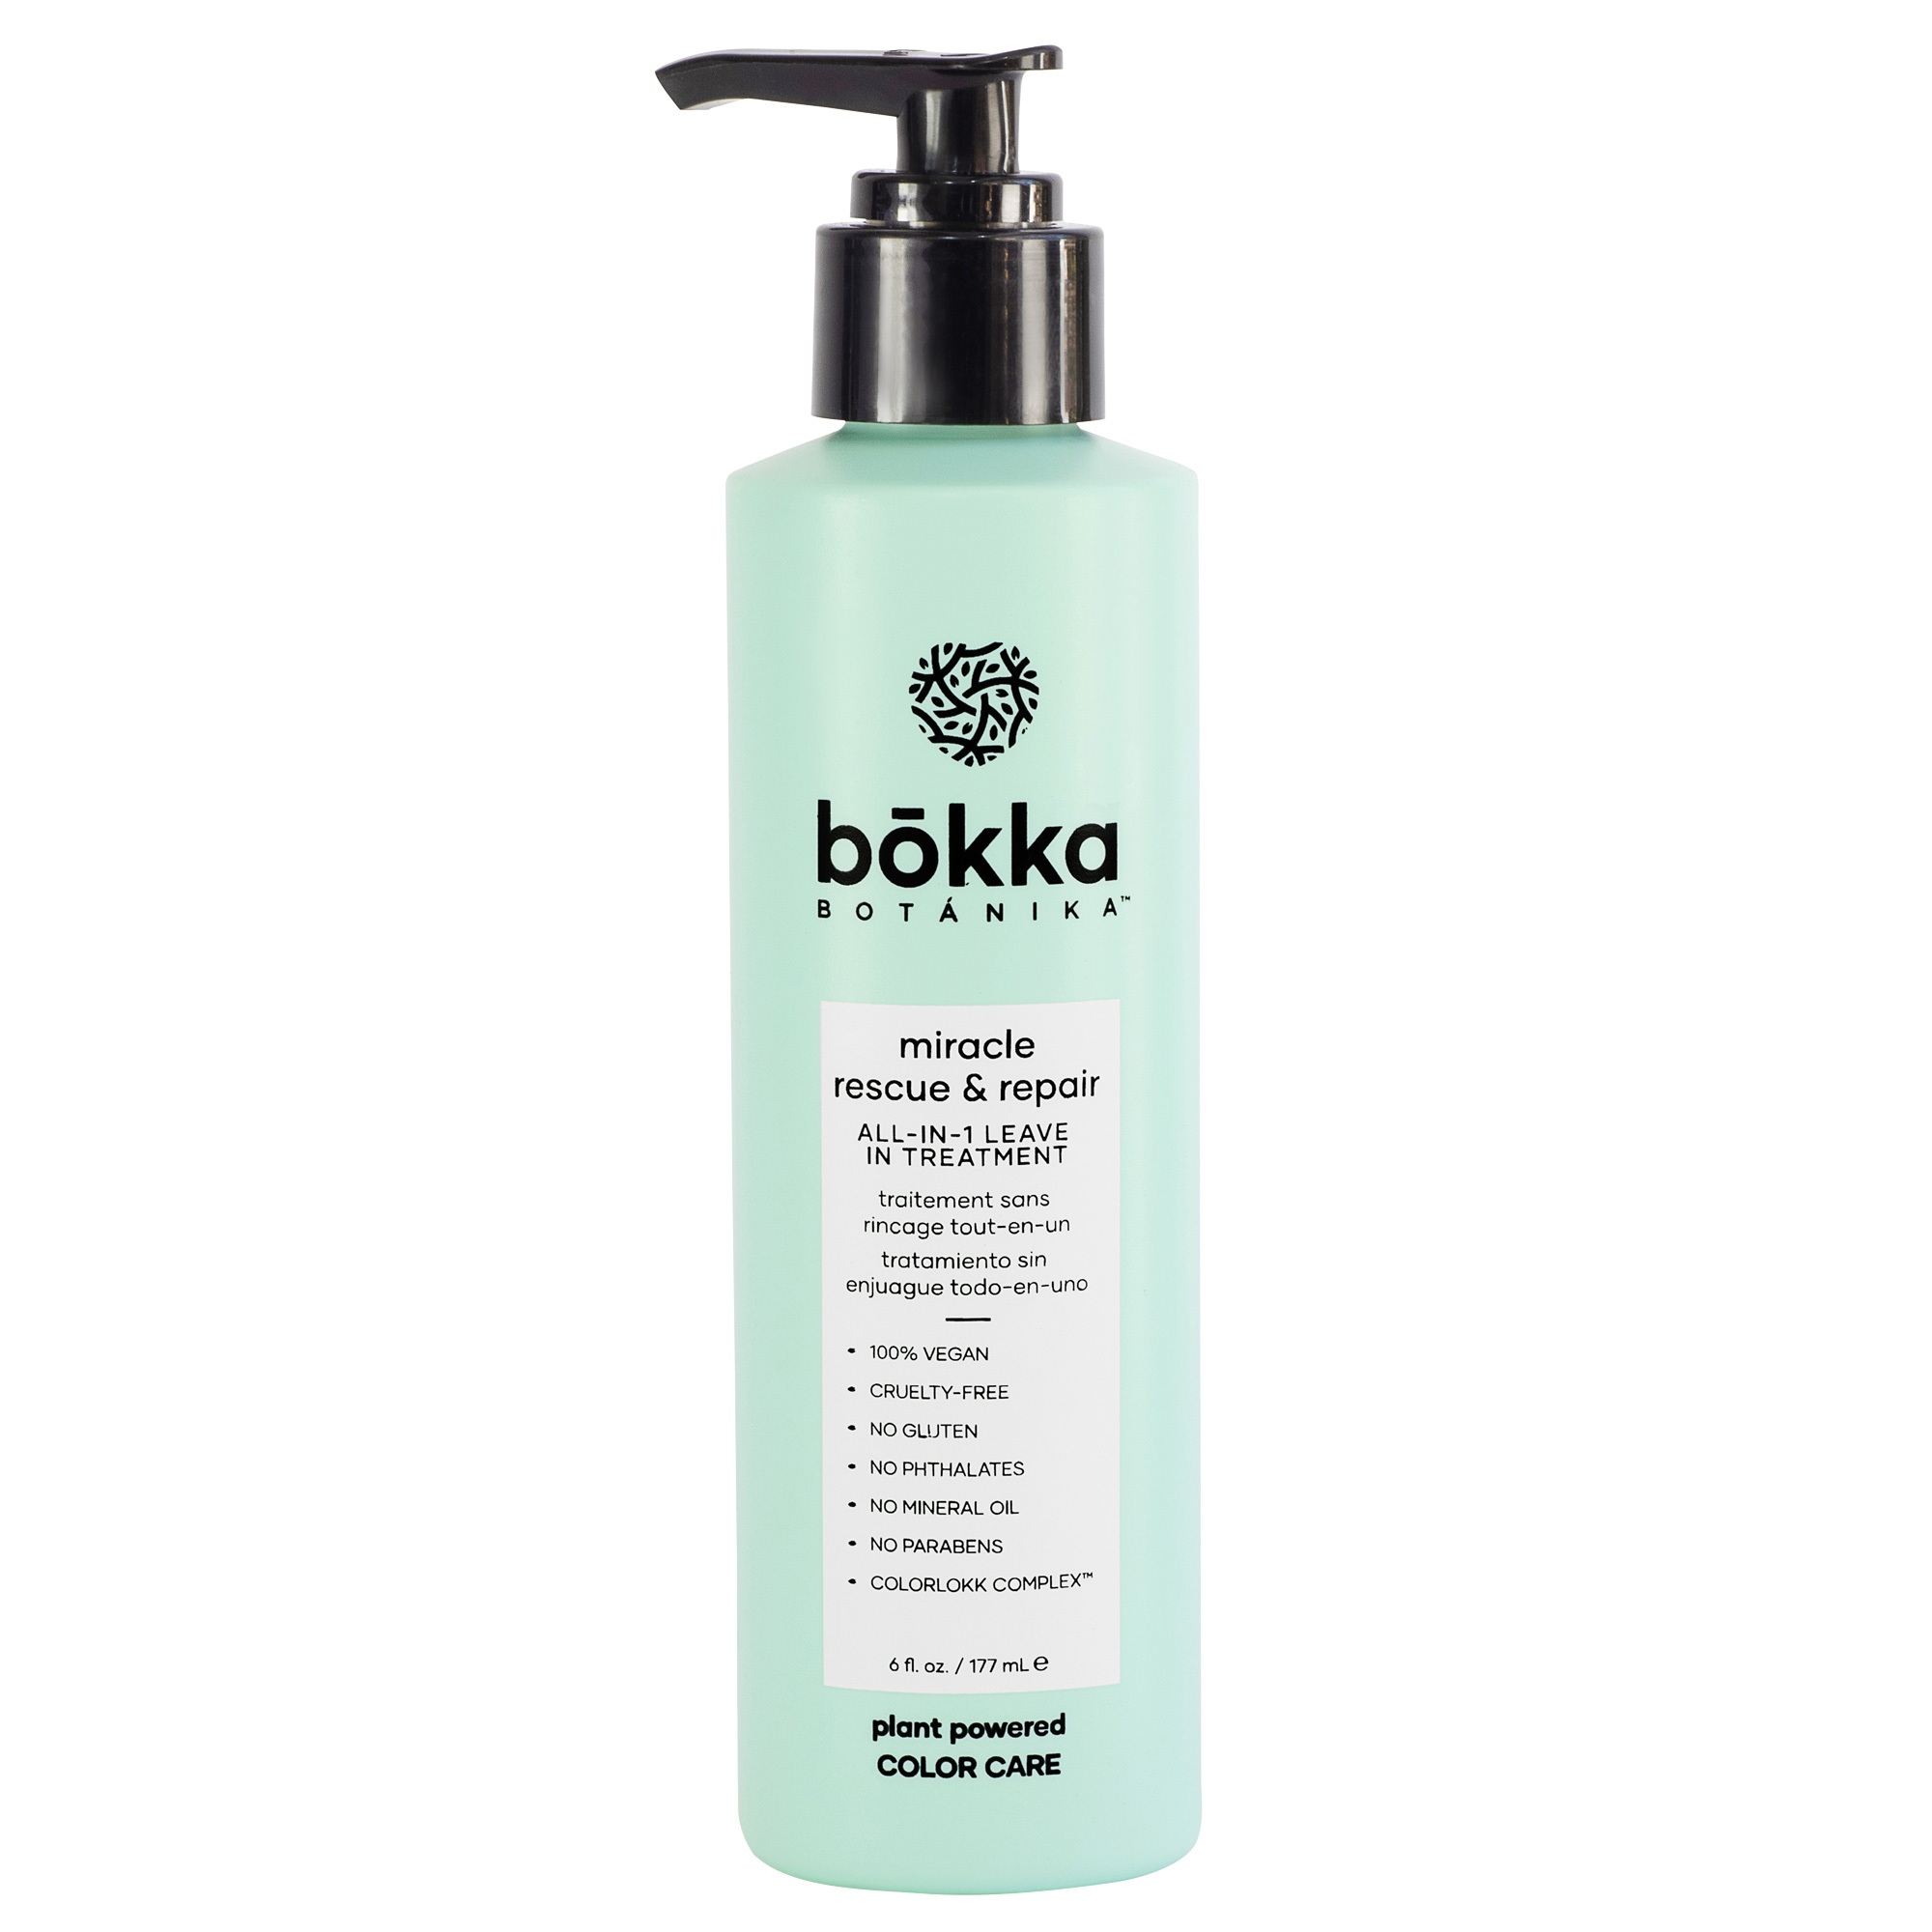 bokka BOTANICA Miracle Rescue & Repair All-In-1 Leave In Treatment 6oz